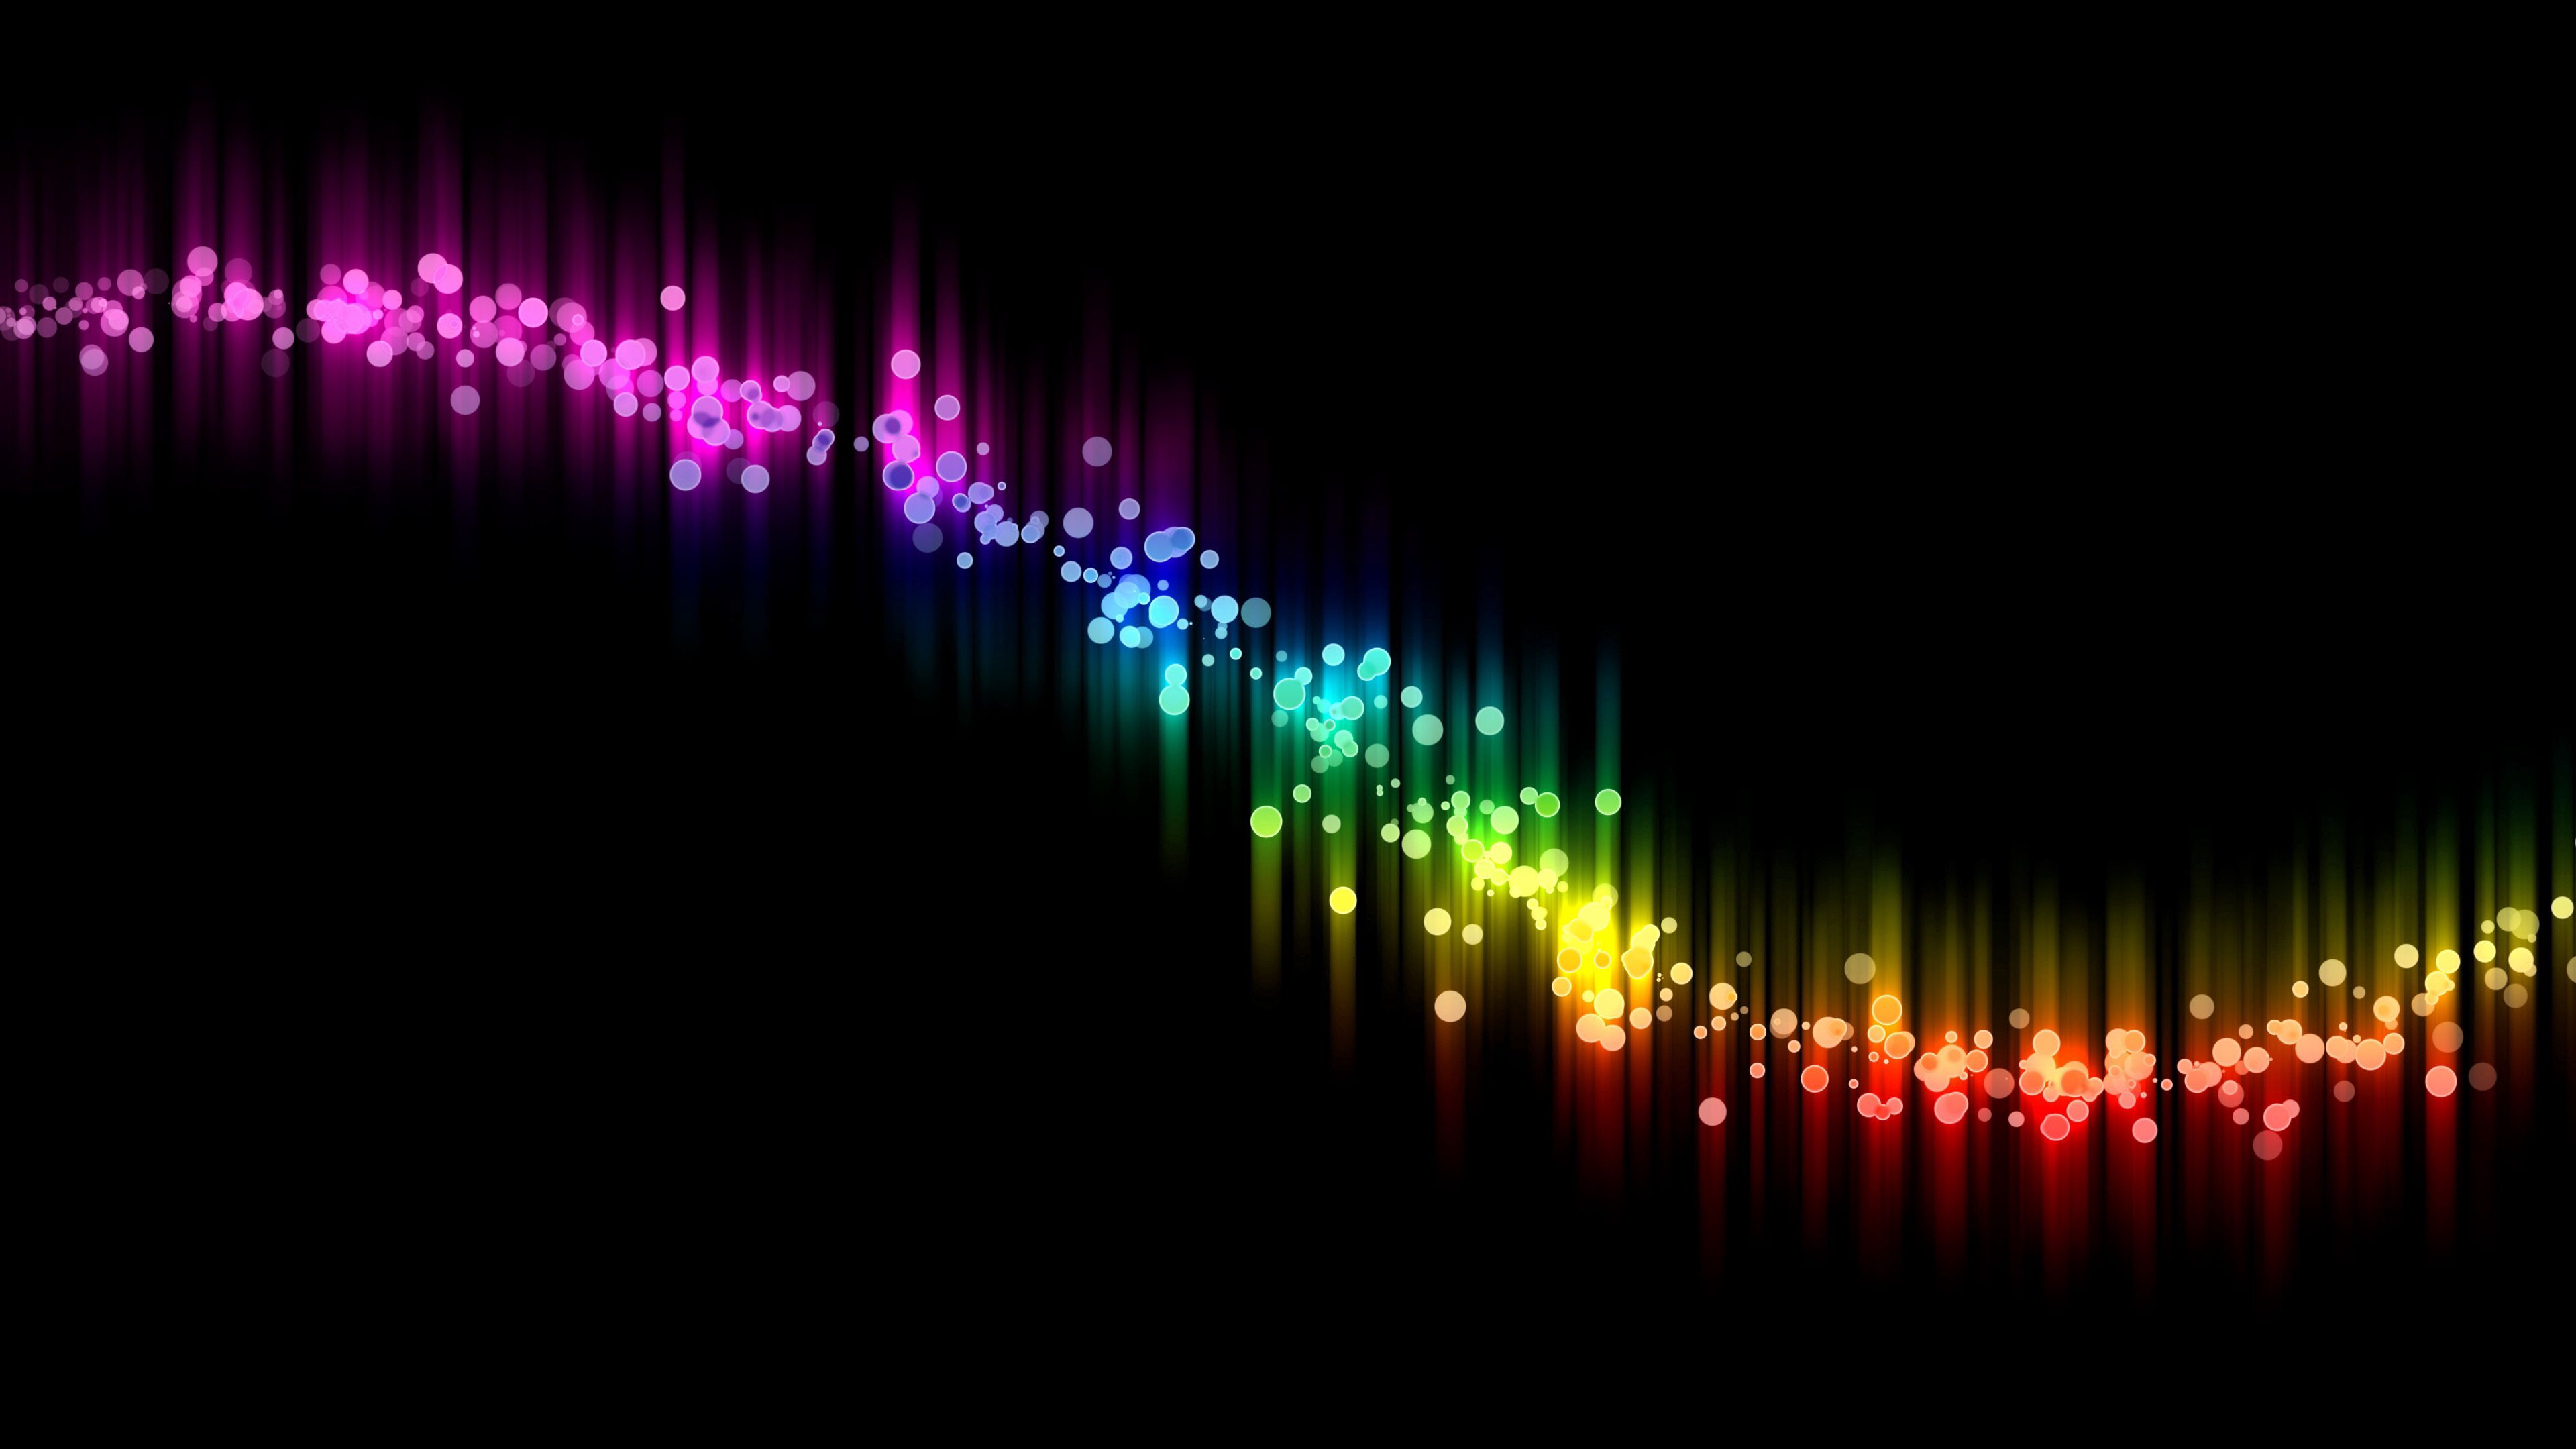 Download wallpaper 3840x2160 abstract, black, colorful, curve 4k uhd 16 ...